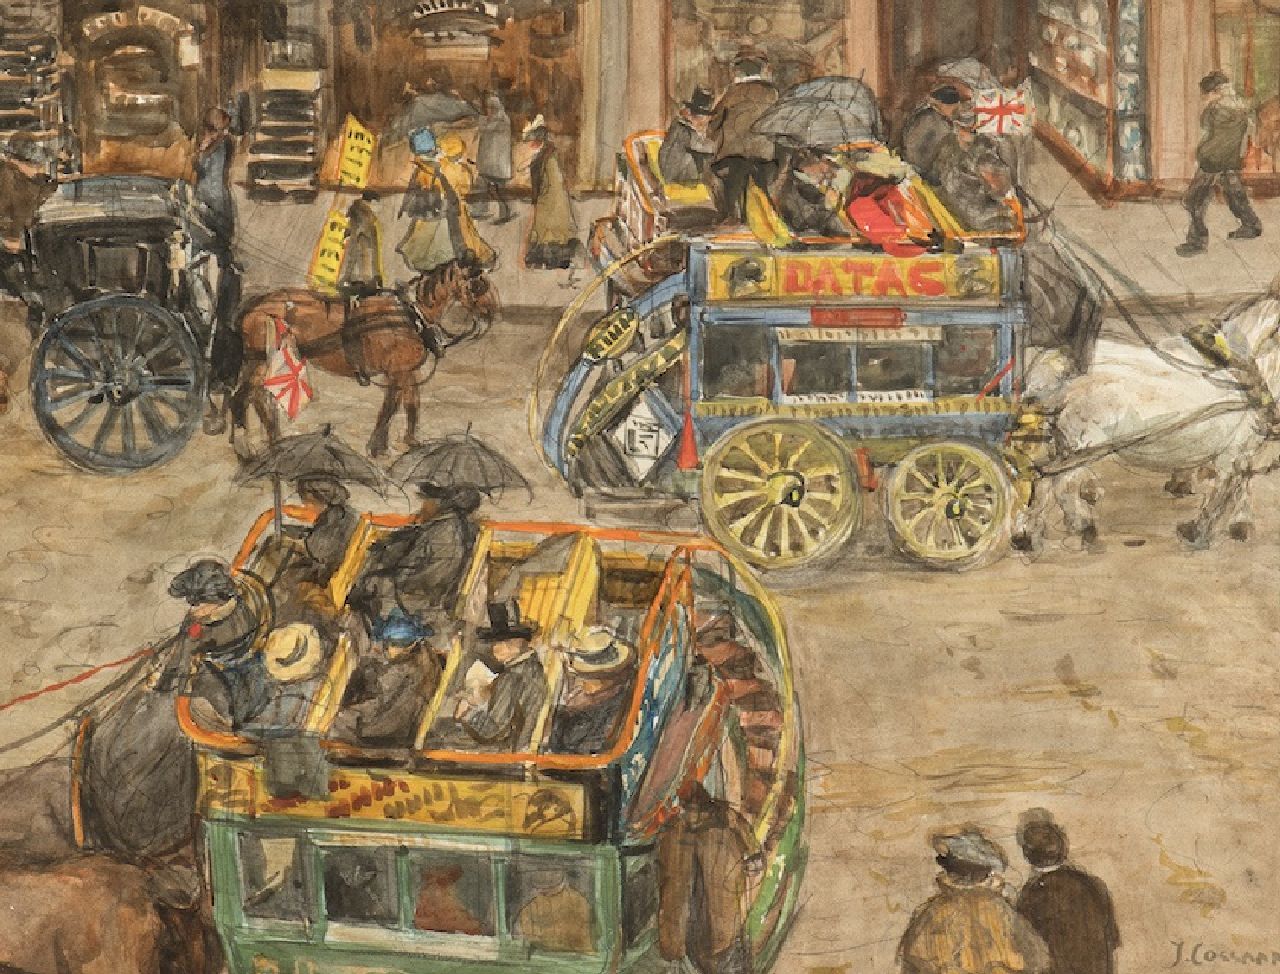 Cossaar J.C.W.  | Jacobus Cornelis Wyand 'Ko' Cossaar | Watercolours and drawings offered for sale | Omnibusses in a London street, pencil and watercolour on paper 38.8 x 55.8 cm, signed l.r.